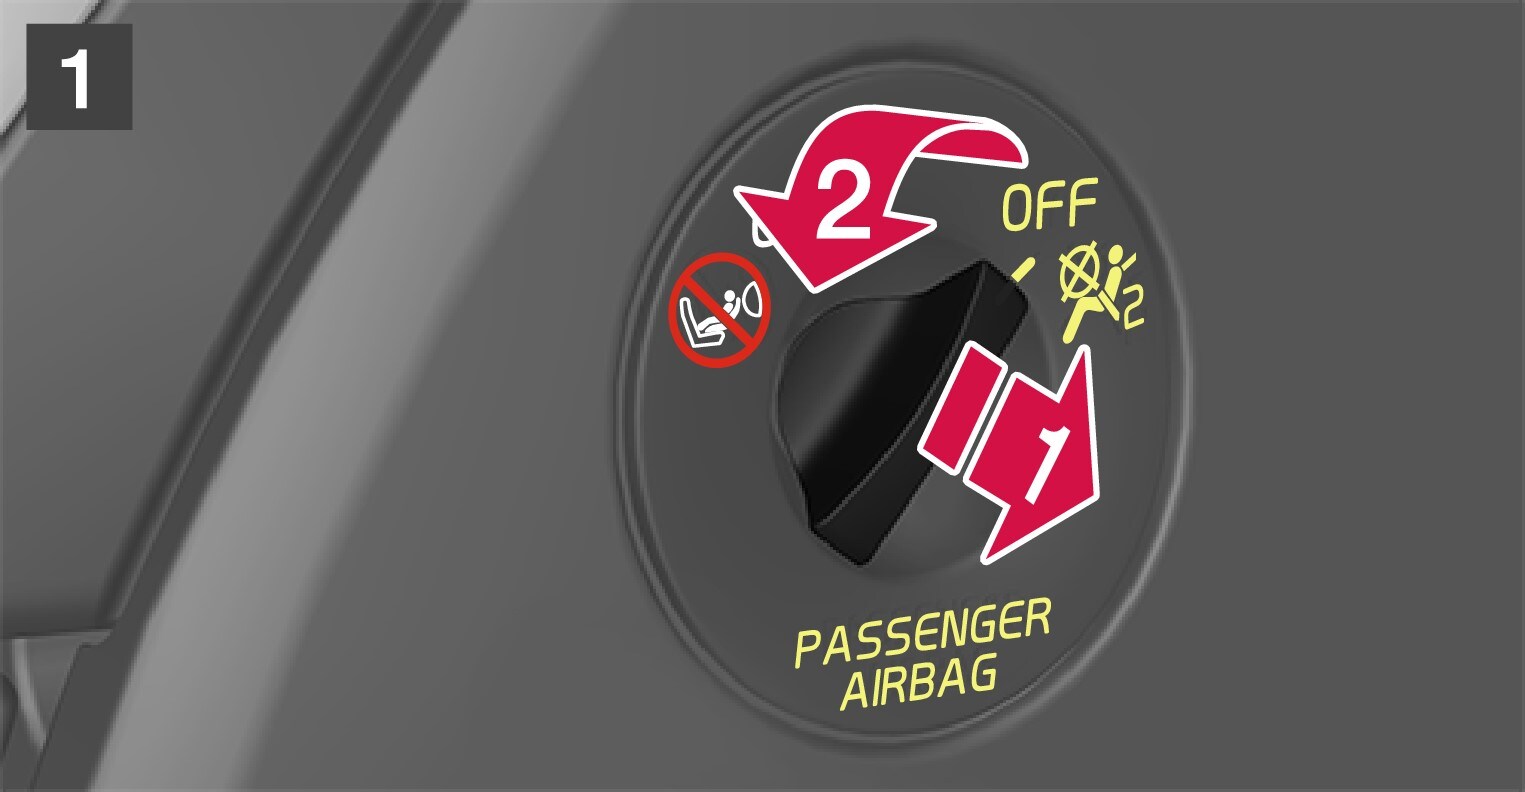 P5-1507–Safety–Passenger airbag cut off switch to on